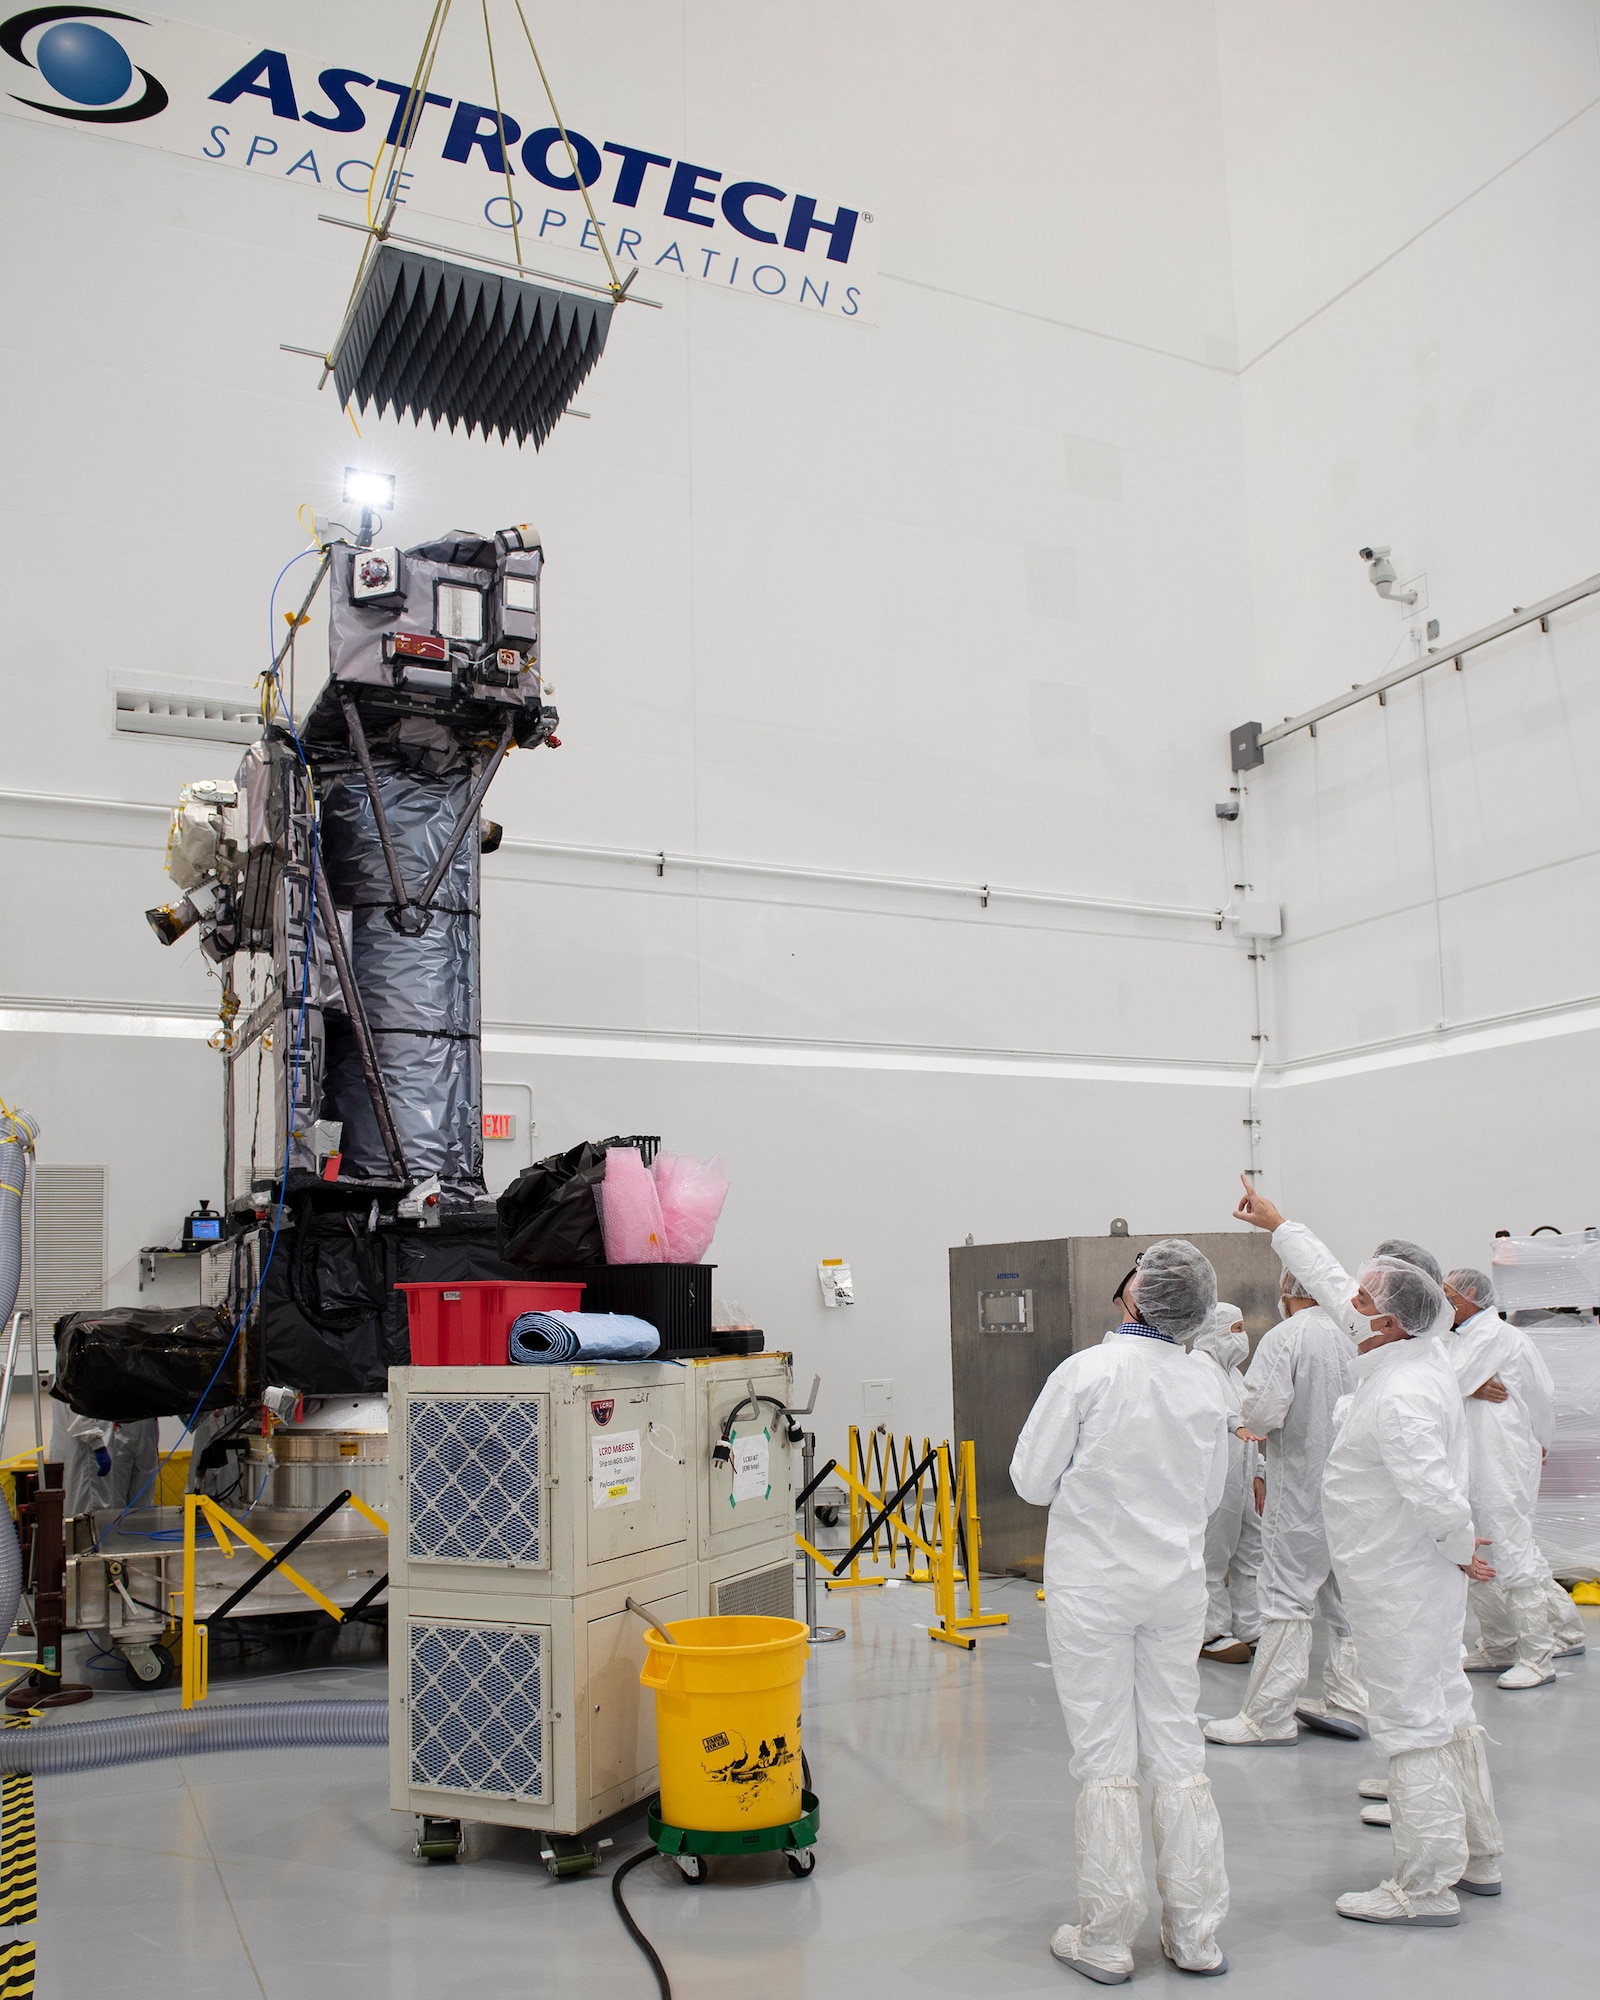 Members of the Air Force Technical Applications Center at Patrick Space Force Base, Fla., get an up-close view of their payload aboard the Department of Defense’s Space Test Program Satellite 6, or STPSat-6 at Astrotech's Titusville, Fla., facility. Once operational, the spacecraft will deploy two U.S. Space Force technology demonstration satellites into a geosynchronous orbit more than 22,000 miles above the earth that will be used to advance warfighting capabilities in the areas of nuclear detonation detection, space domain awareness, and communication.  (U.S. Air Force photo by Matthew S. Jurgens)